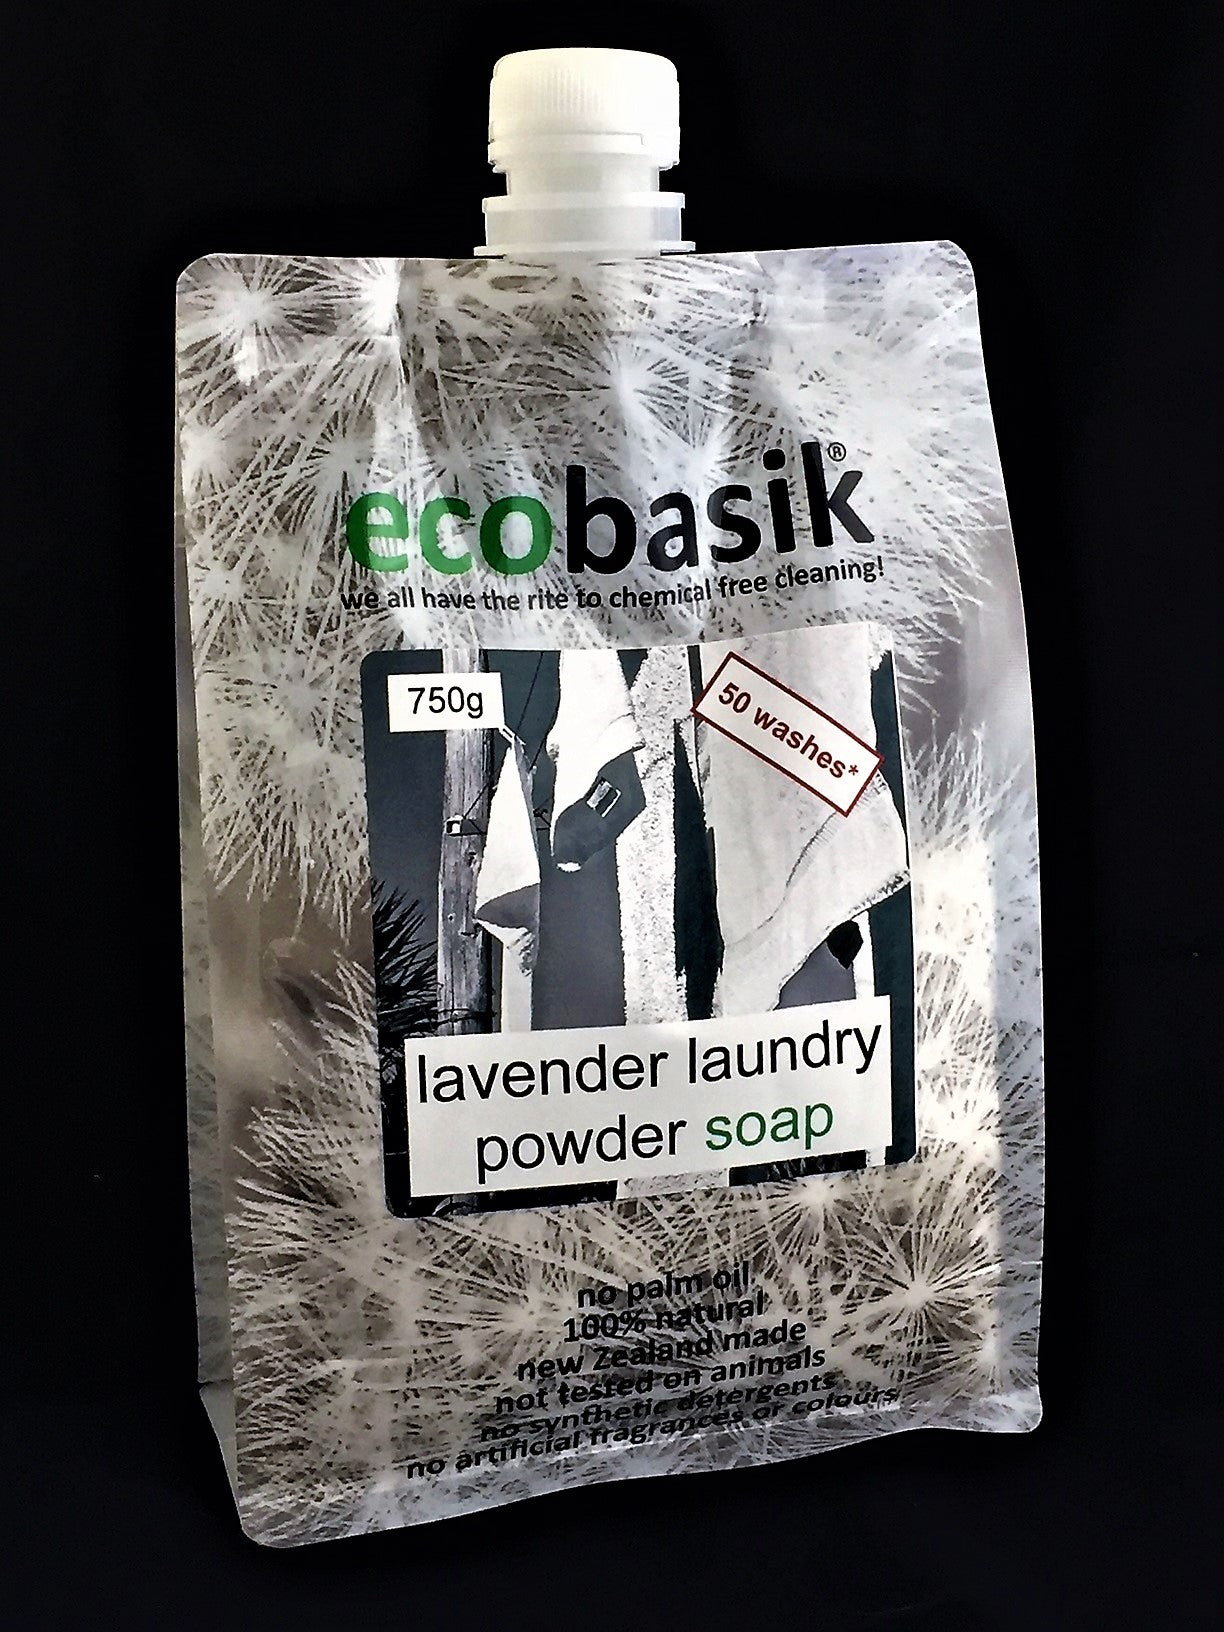 ecobasik - lavender laundry powder soap - SAFE cleaning for the home!